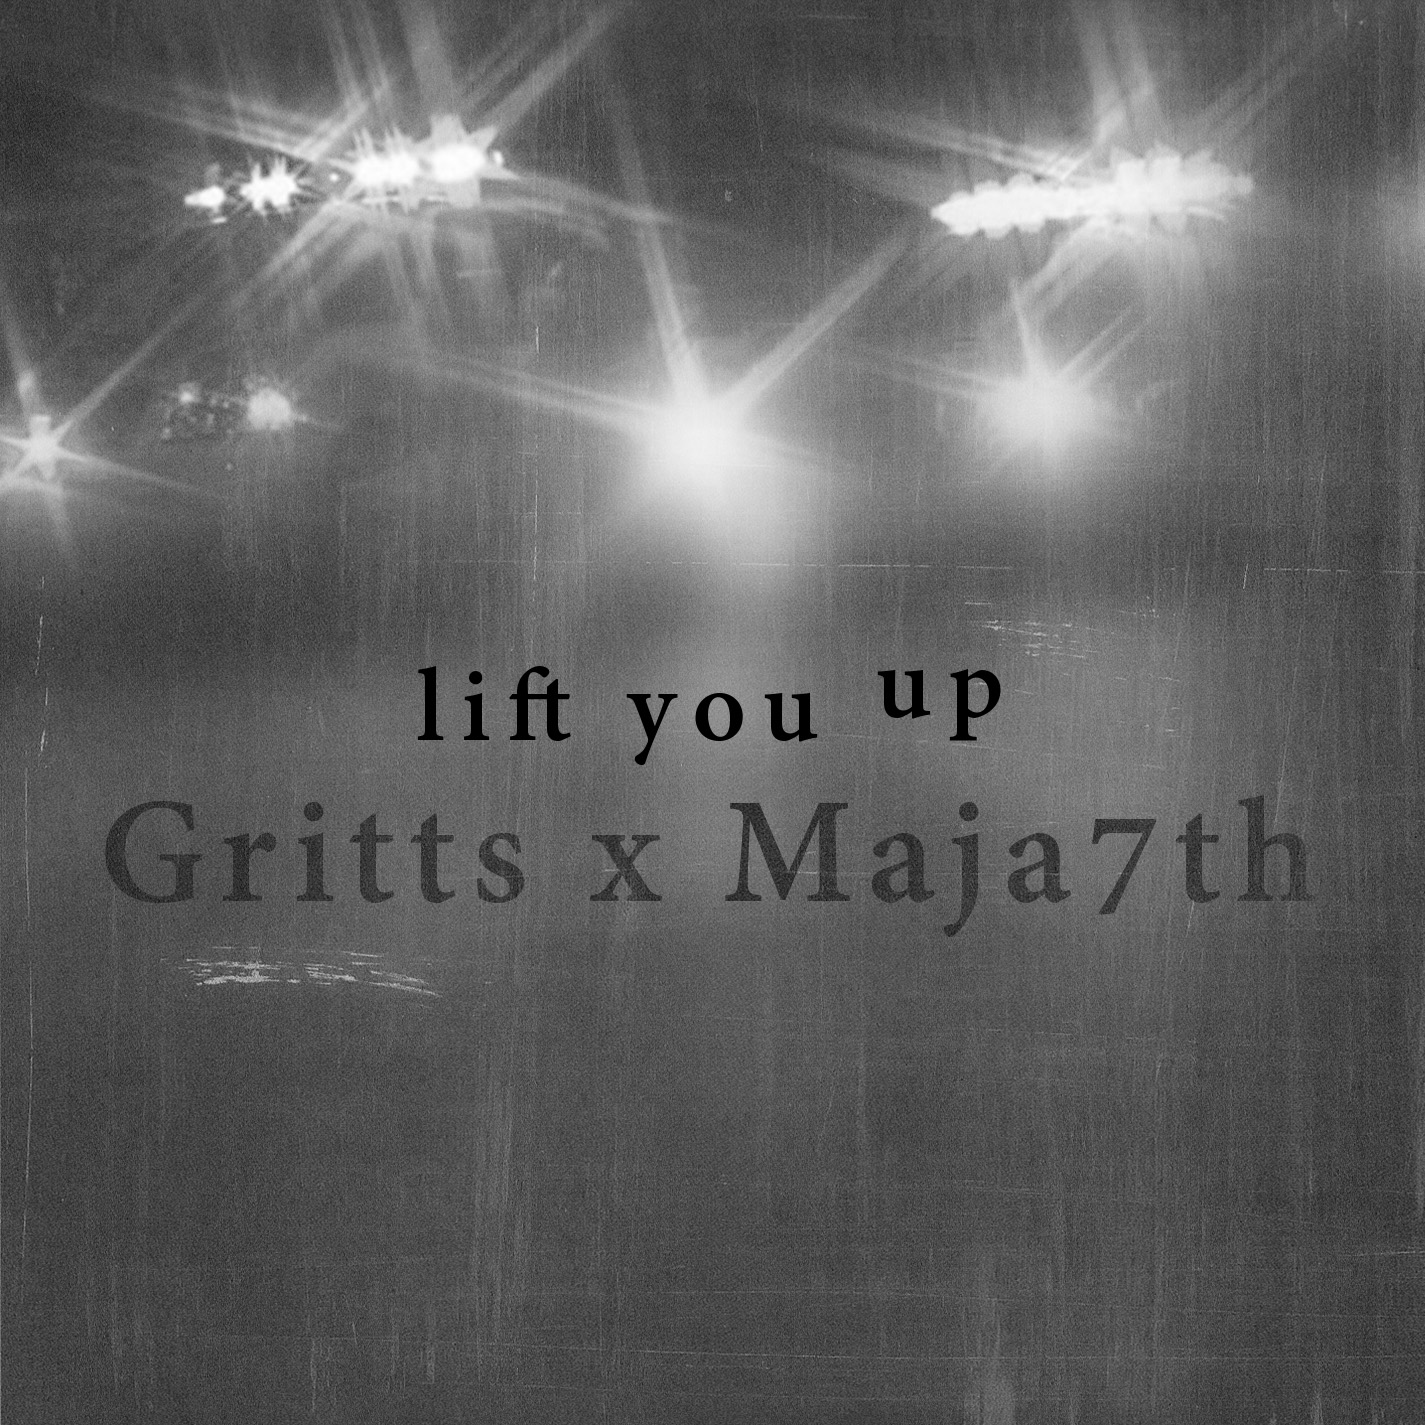 Gritts & Maja 7th - "Lift You Up"